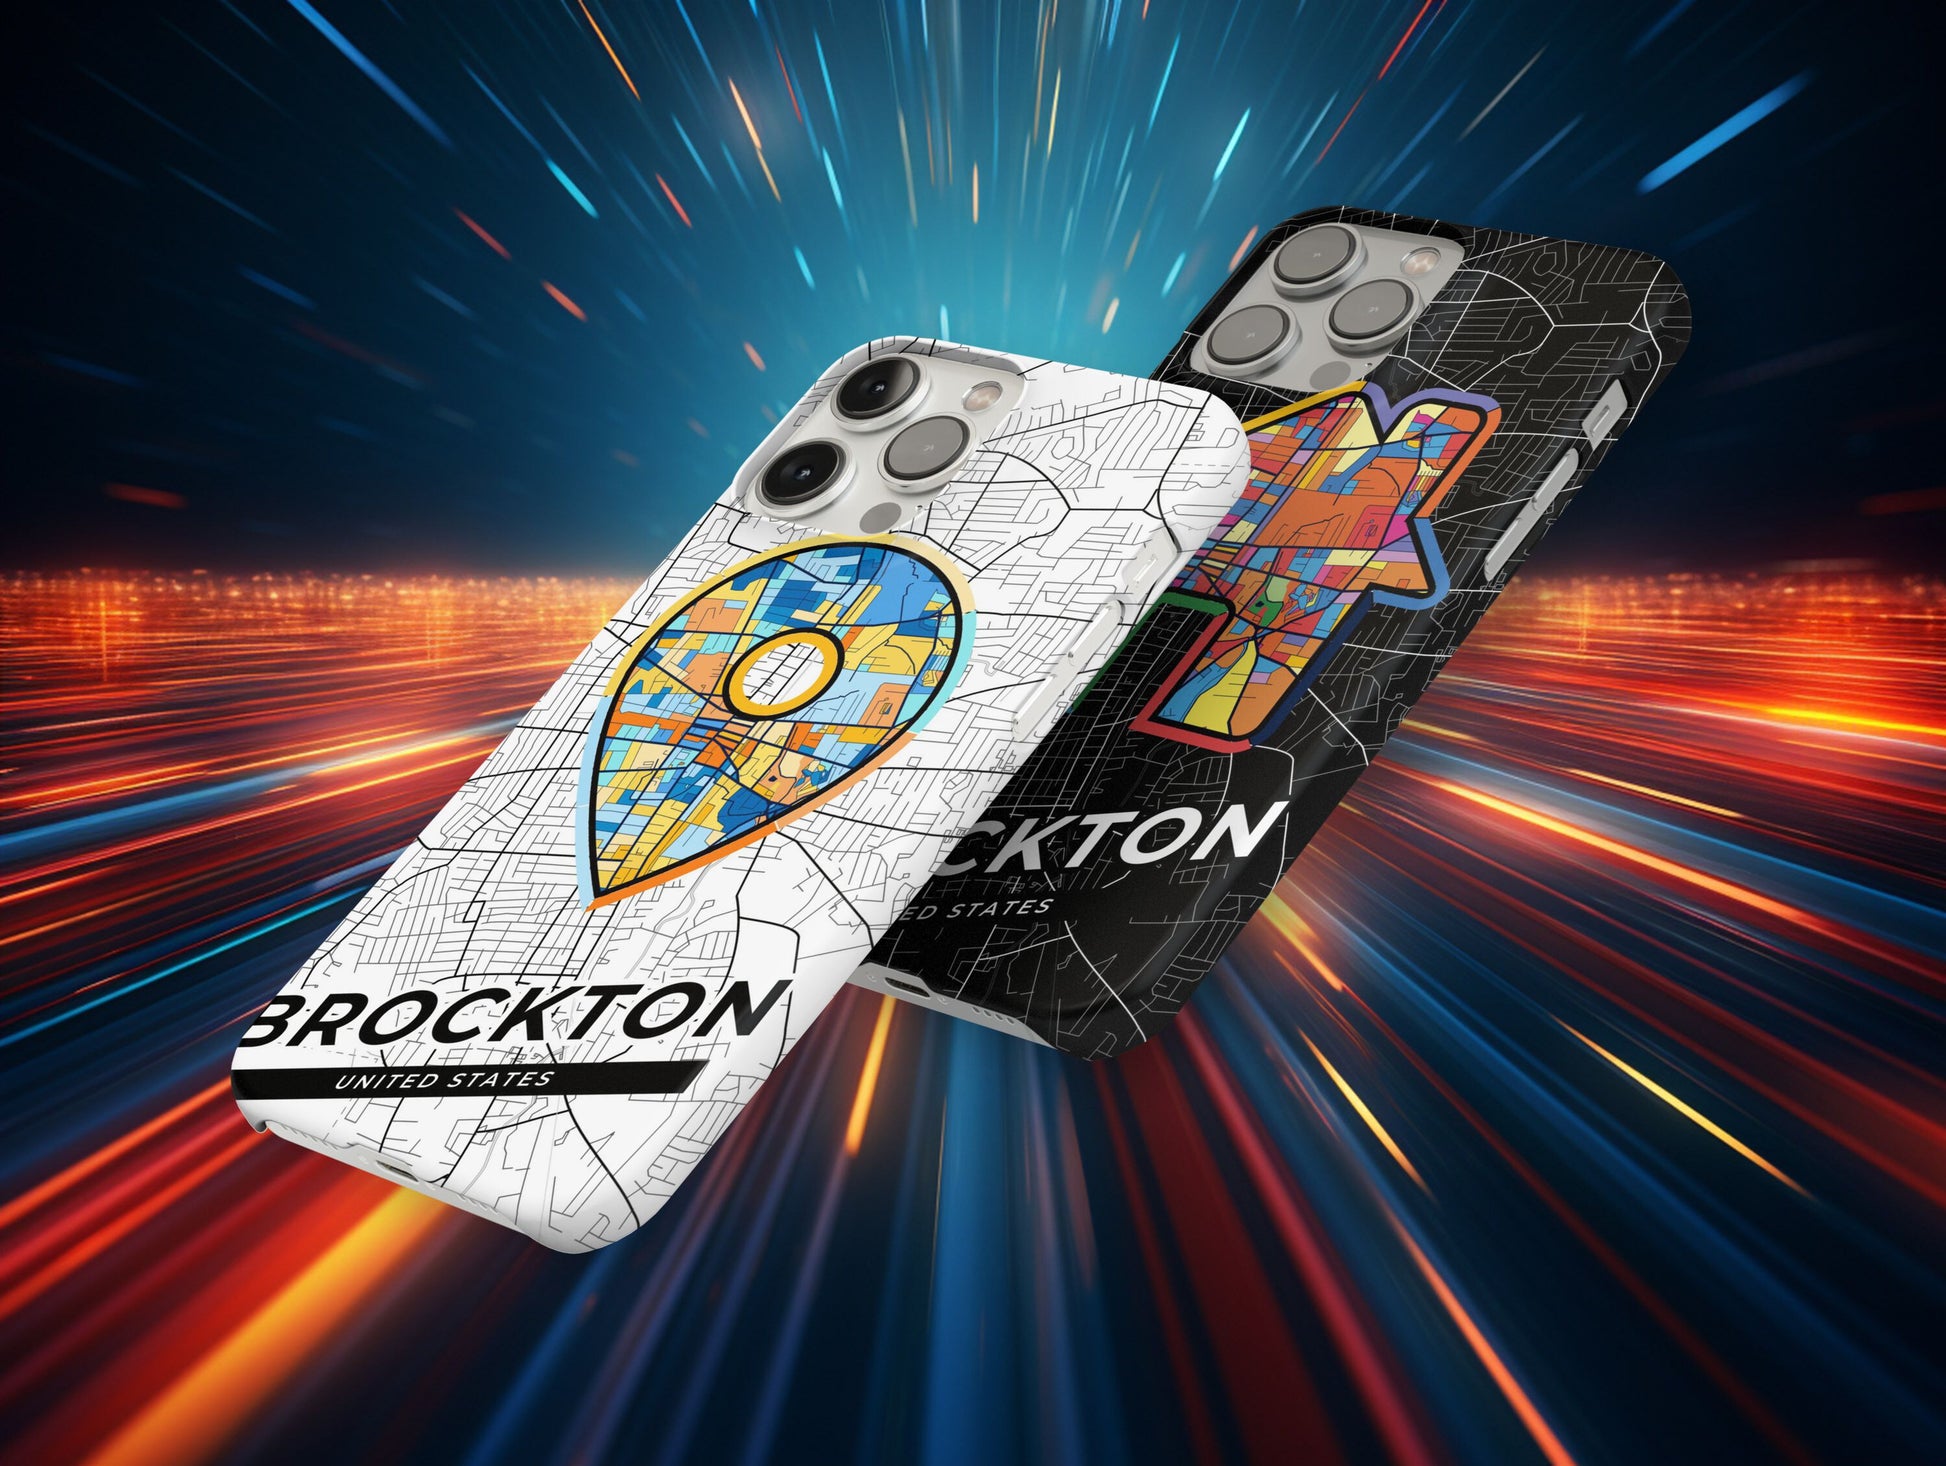 Brockton Massachusetts slim phone case with colorful icon. Birthday, wedding or housewarming gift. Couple match cases.